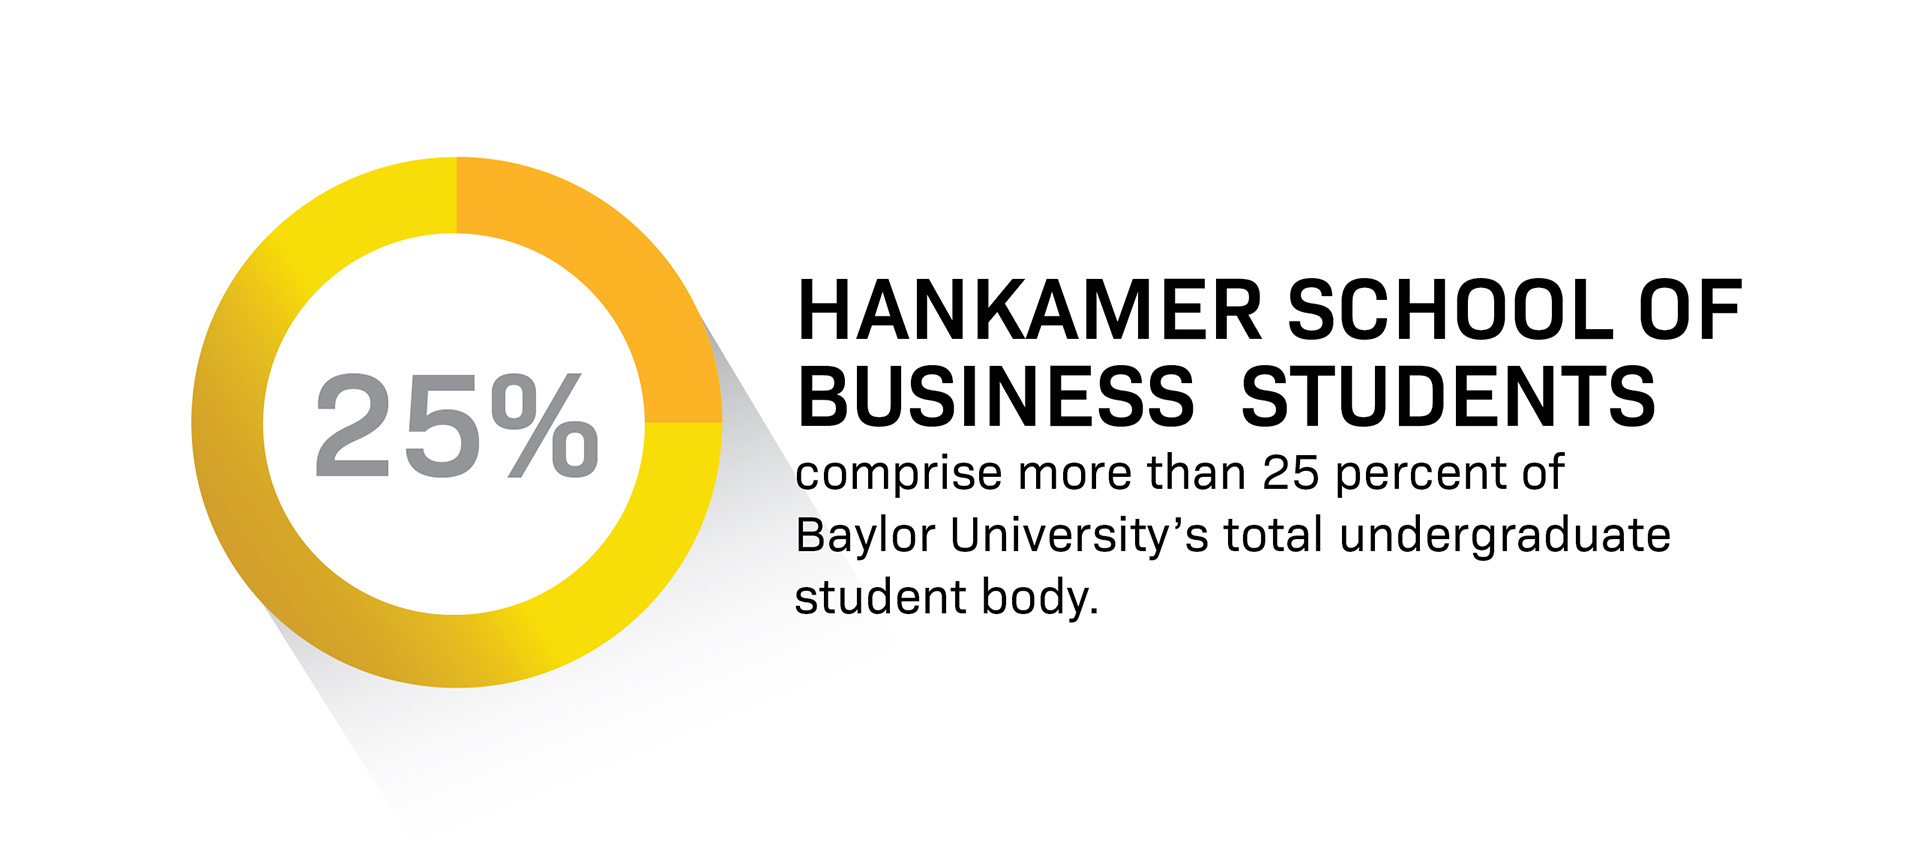 Hankamer School of Business students comprise more than 24 percent of Baylor University's total undergraduate student body